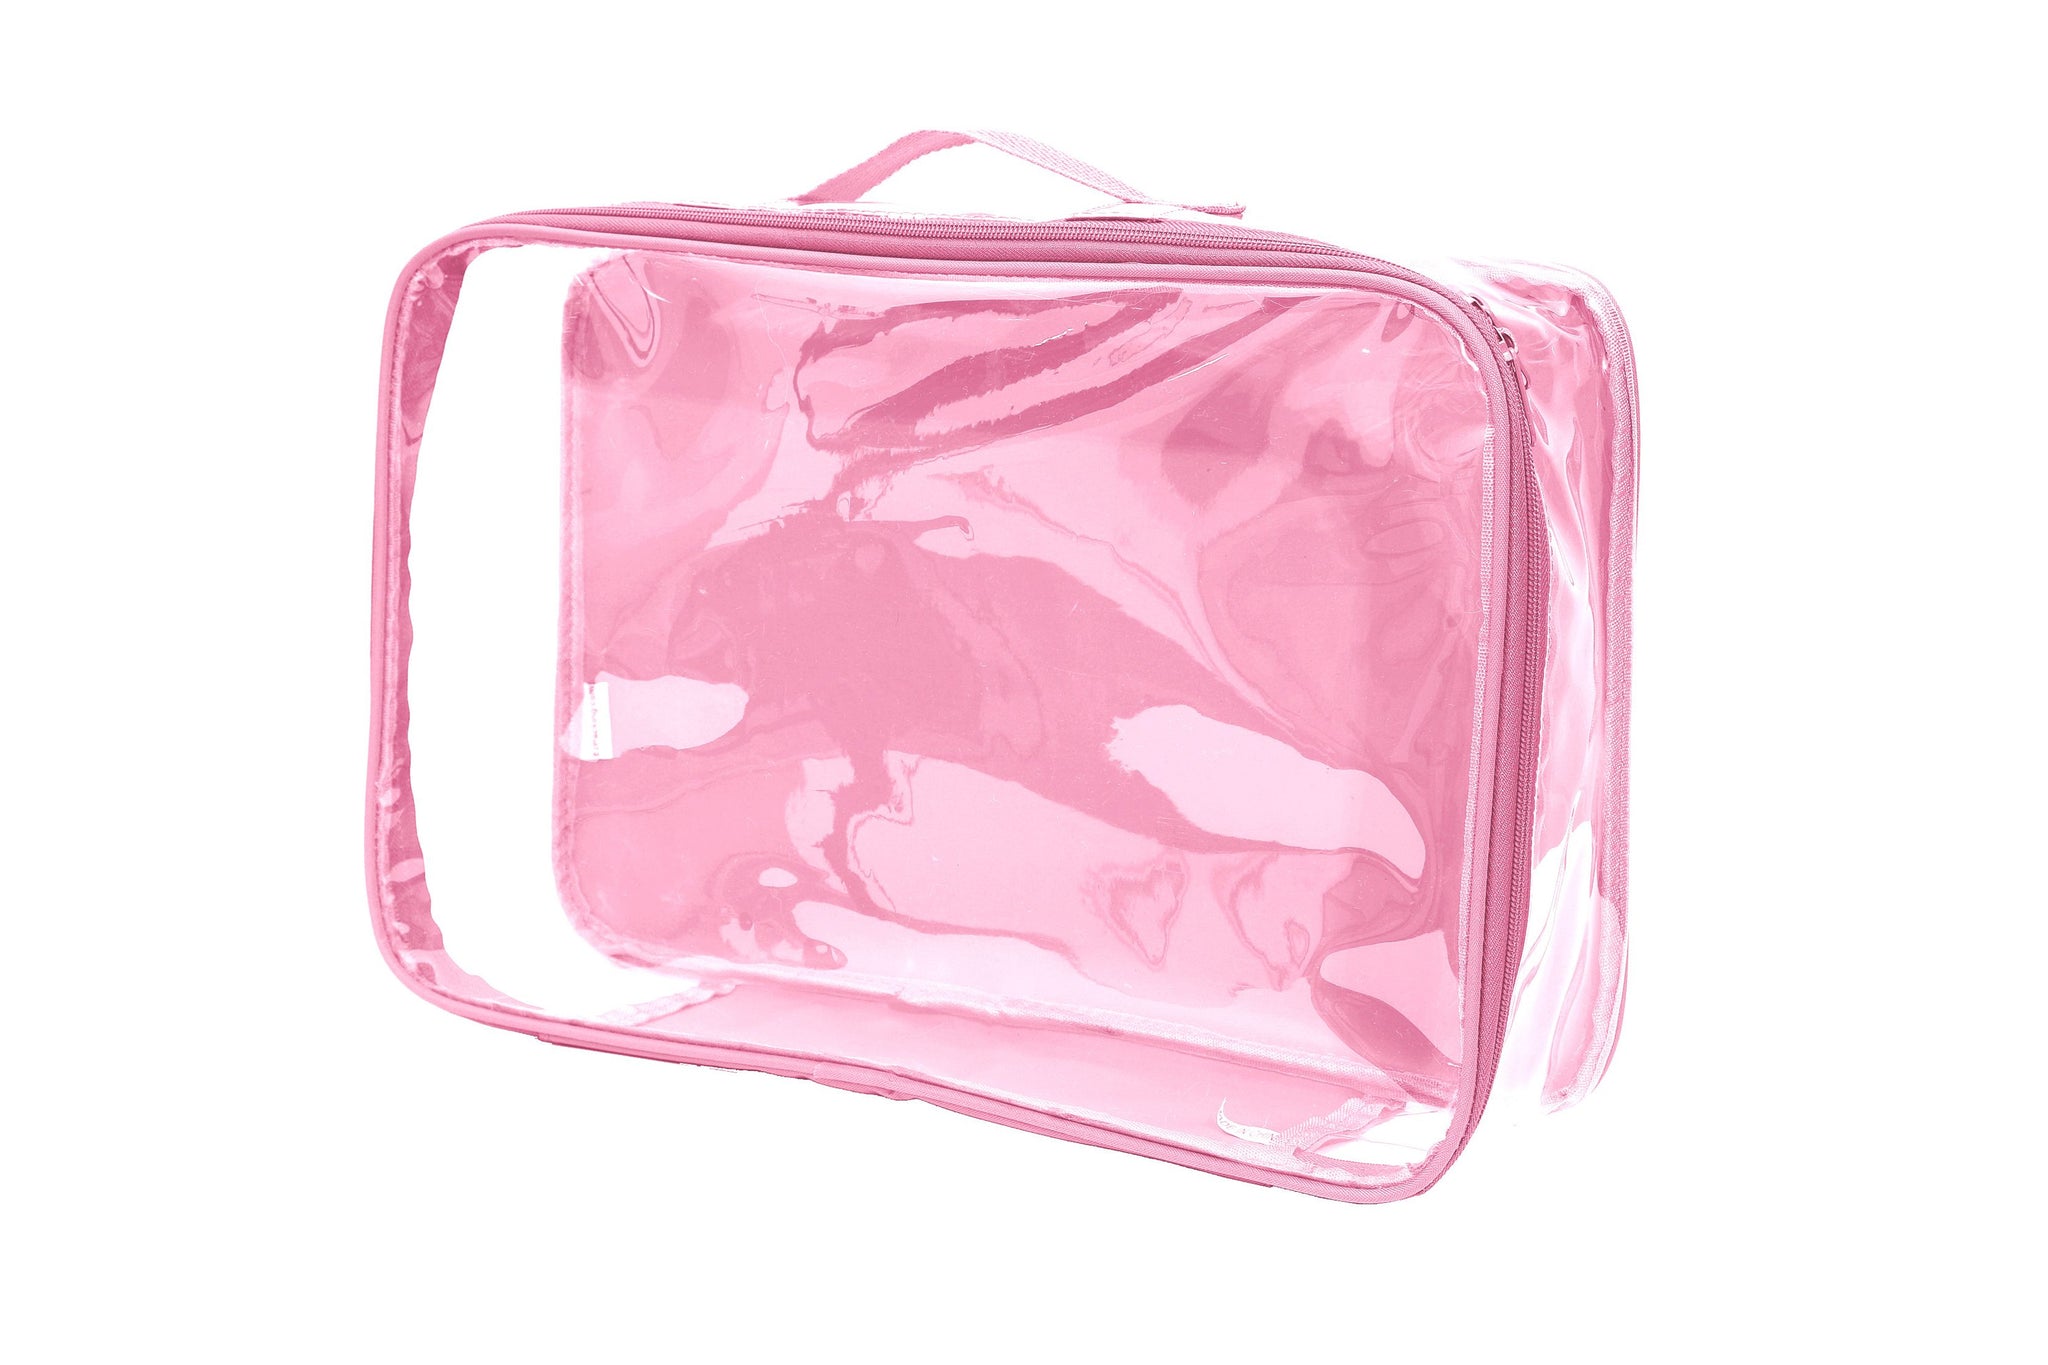 Large Clear Packing Cube for Travel · Water-Resistant & Spill-Proof Suitcase Organizer with Handle · See-Through Divider for Luggage · EzPacking